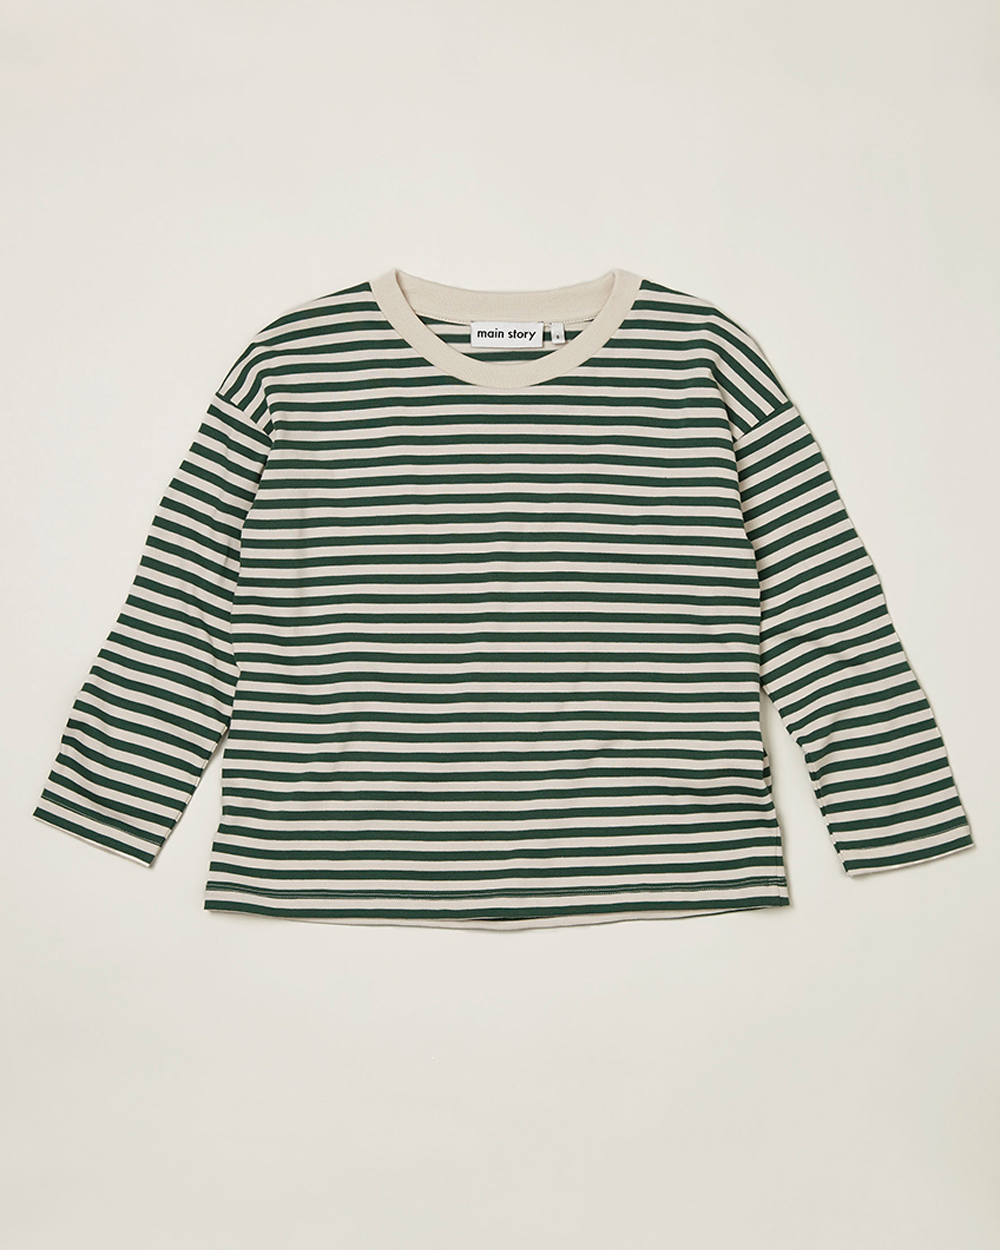 [MAINSTORY] Long Sleeve Tee / Duck Egg &amp; Birch Jersey [14Y]